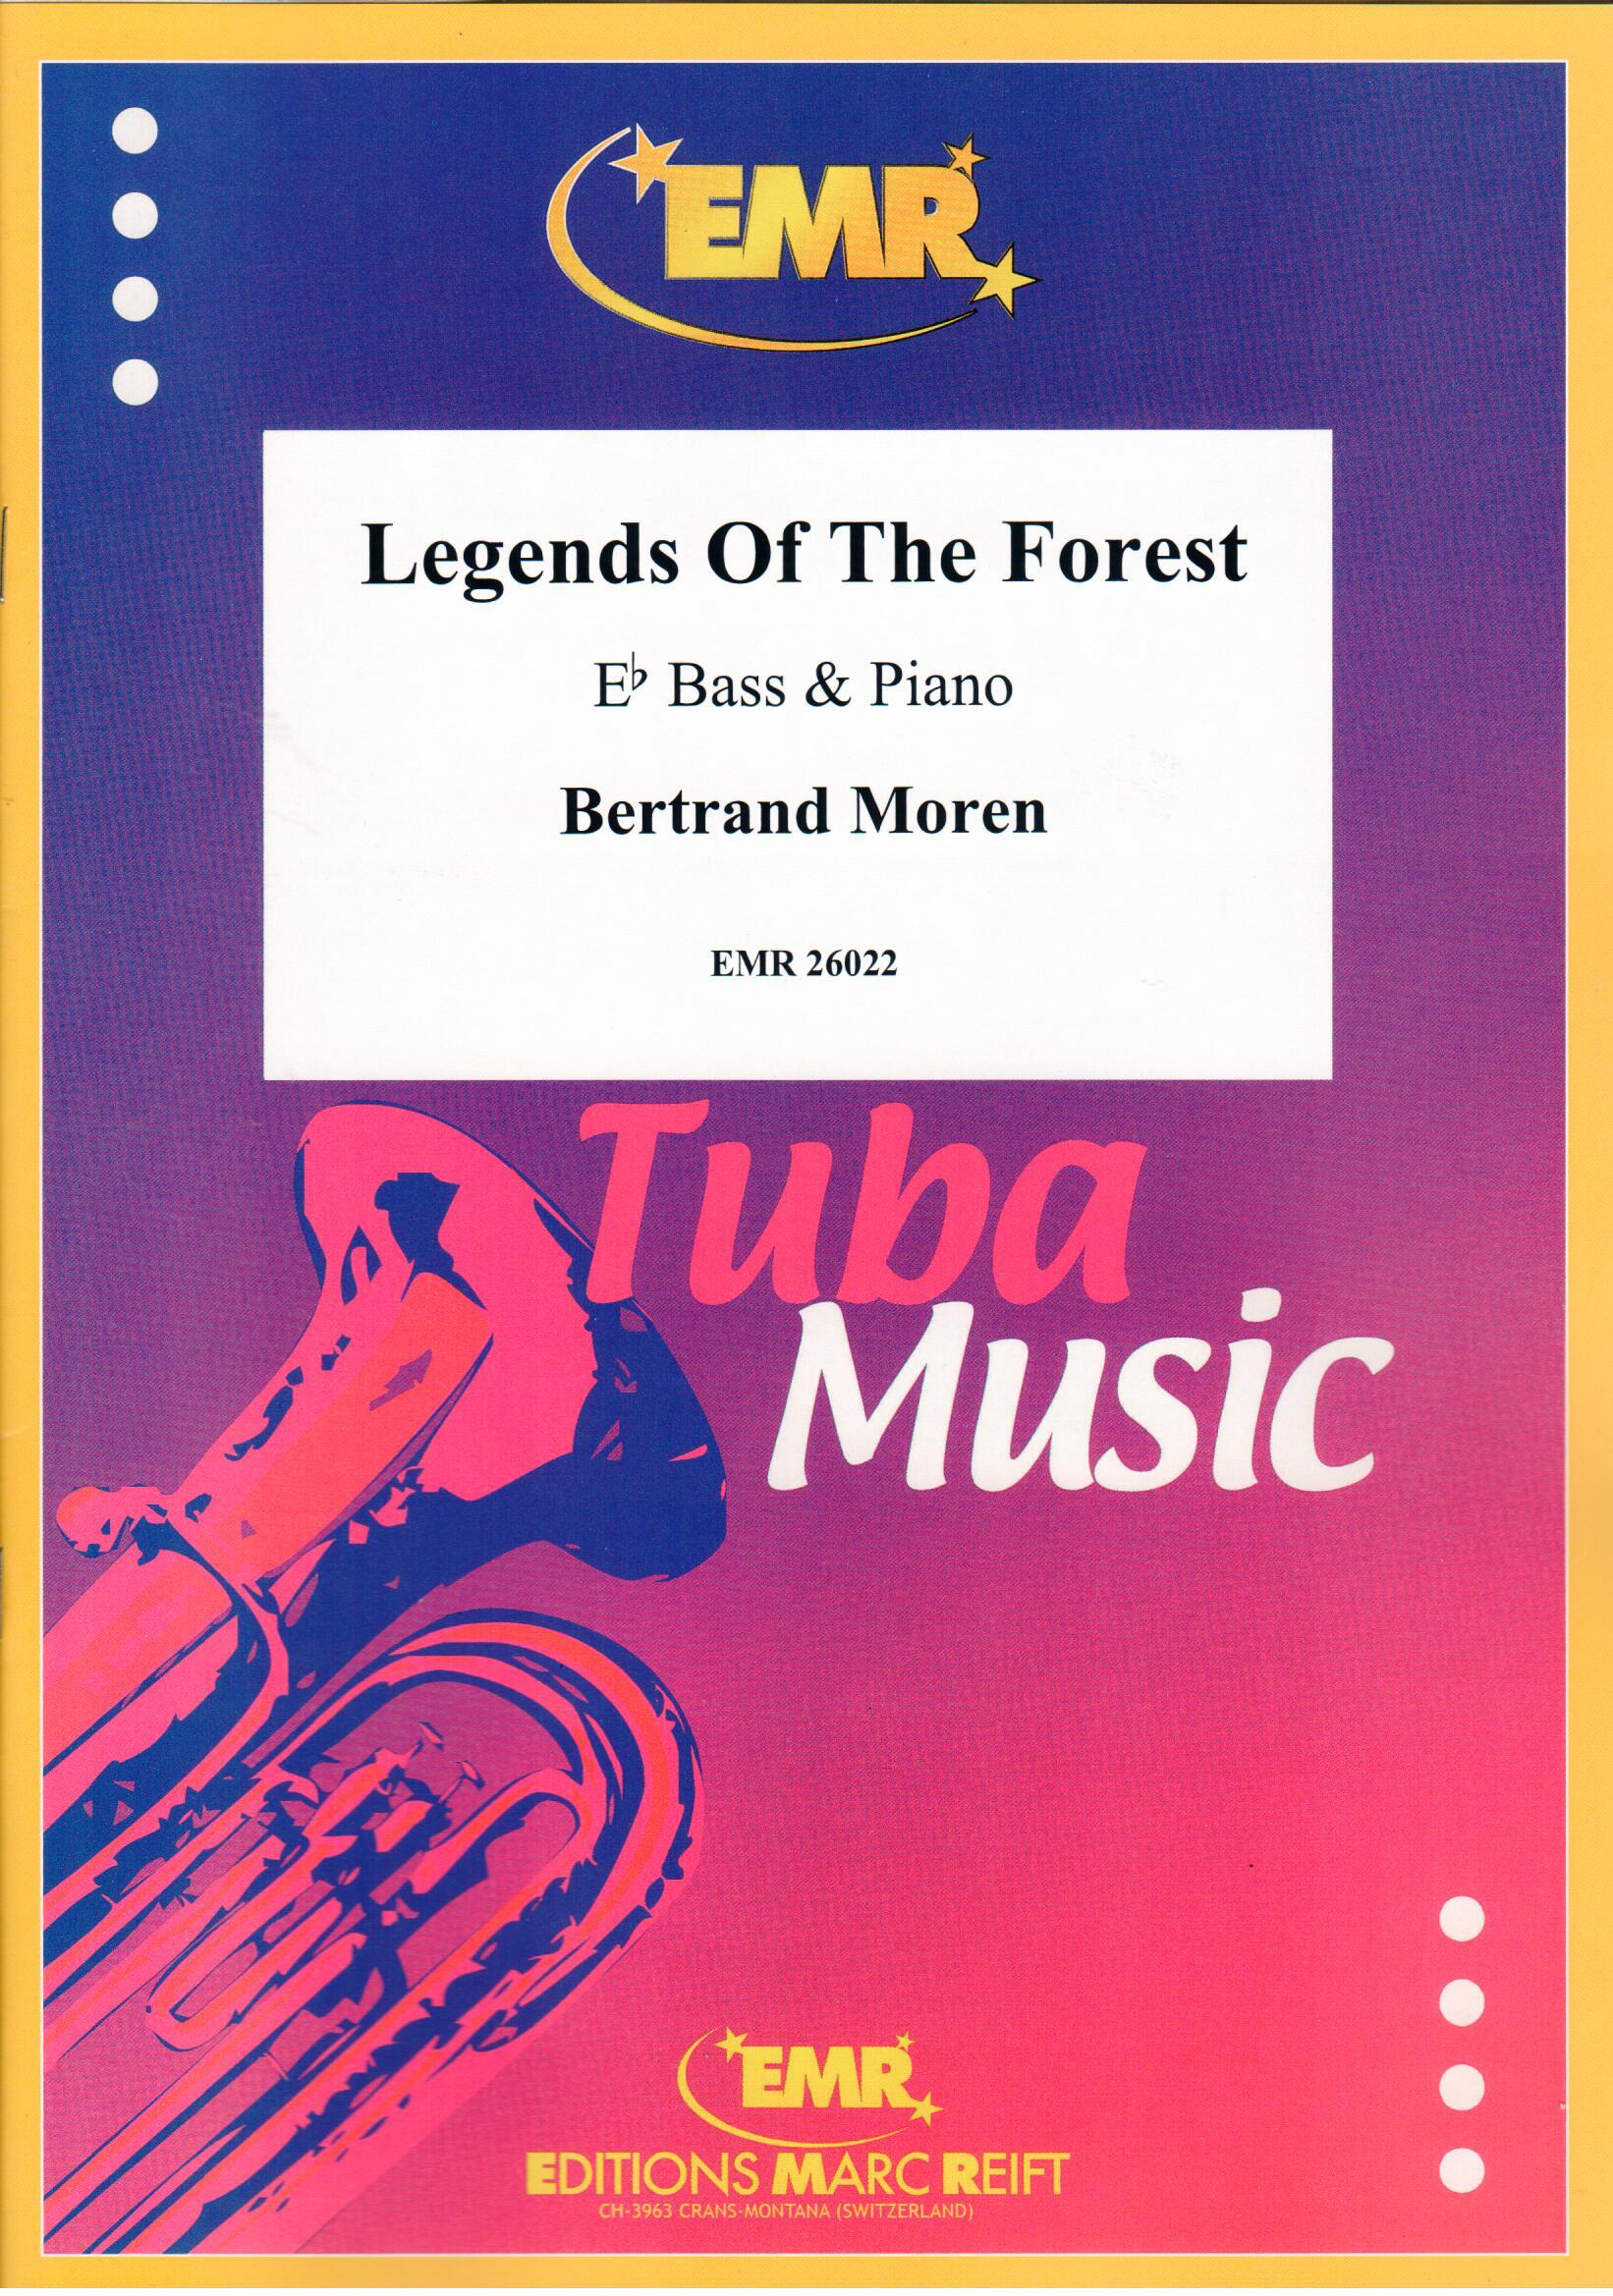 LEGENDS OF THE FOREST, SOLOS - E♭. Bass